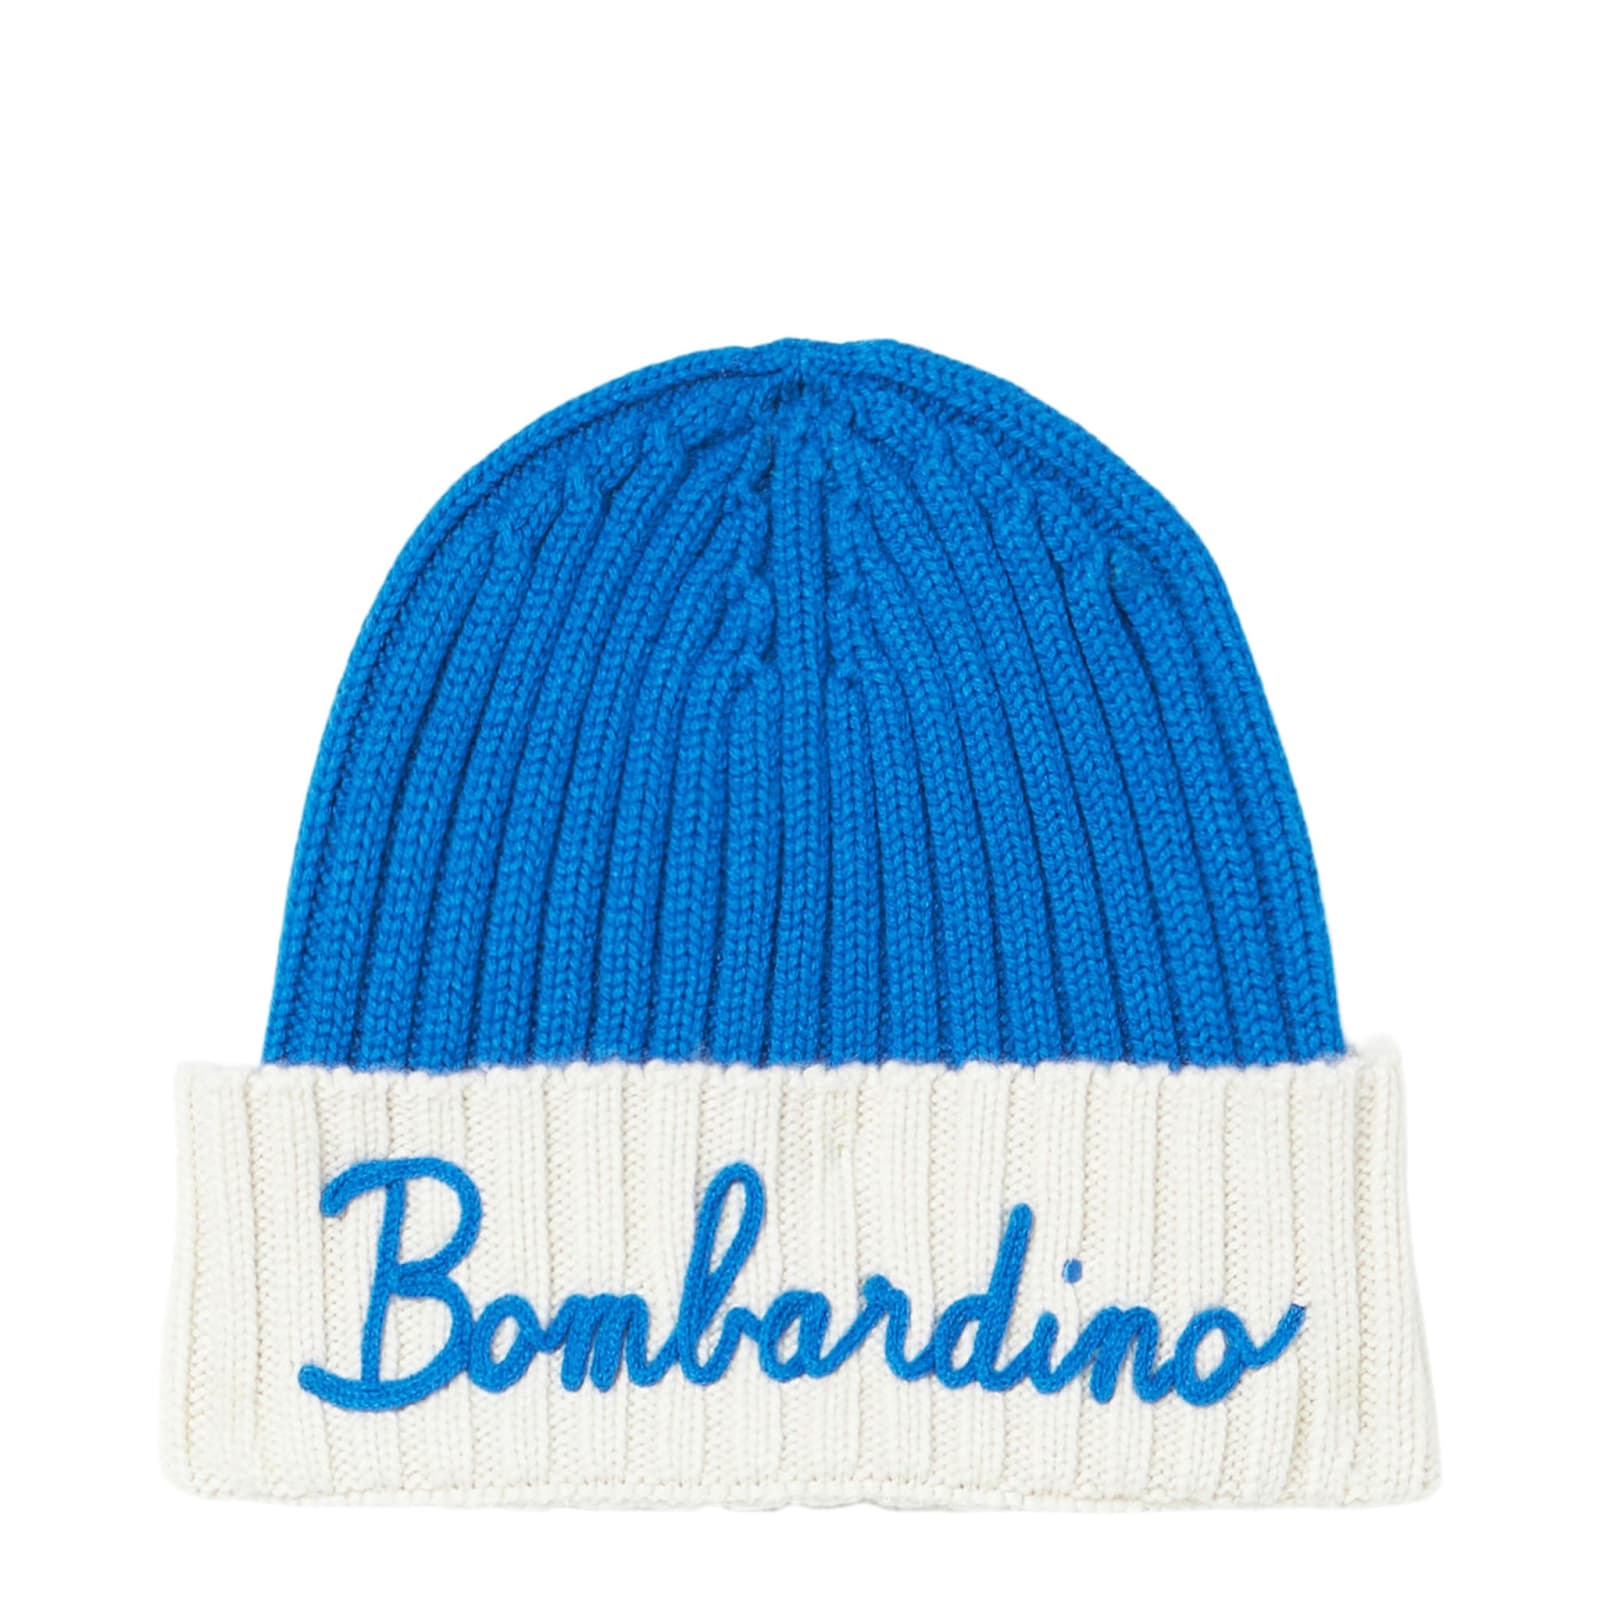 Man Knit Beanie With Bombardino Embroidery